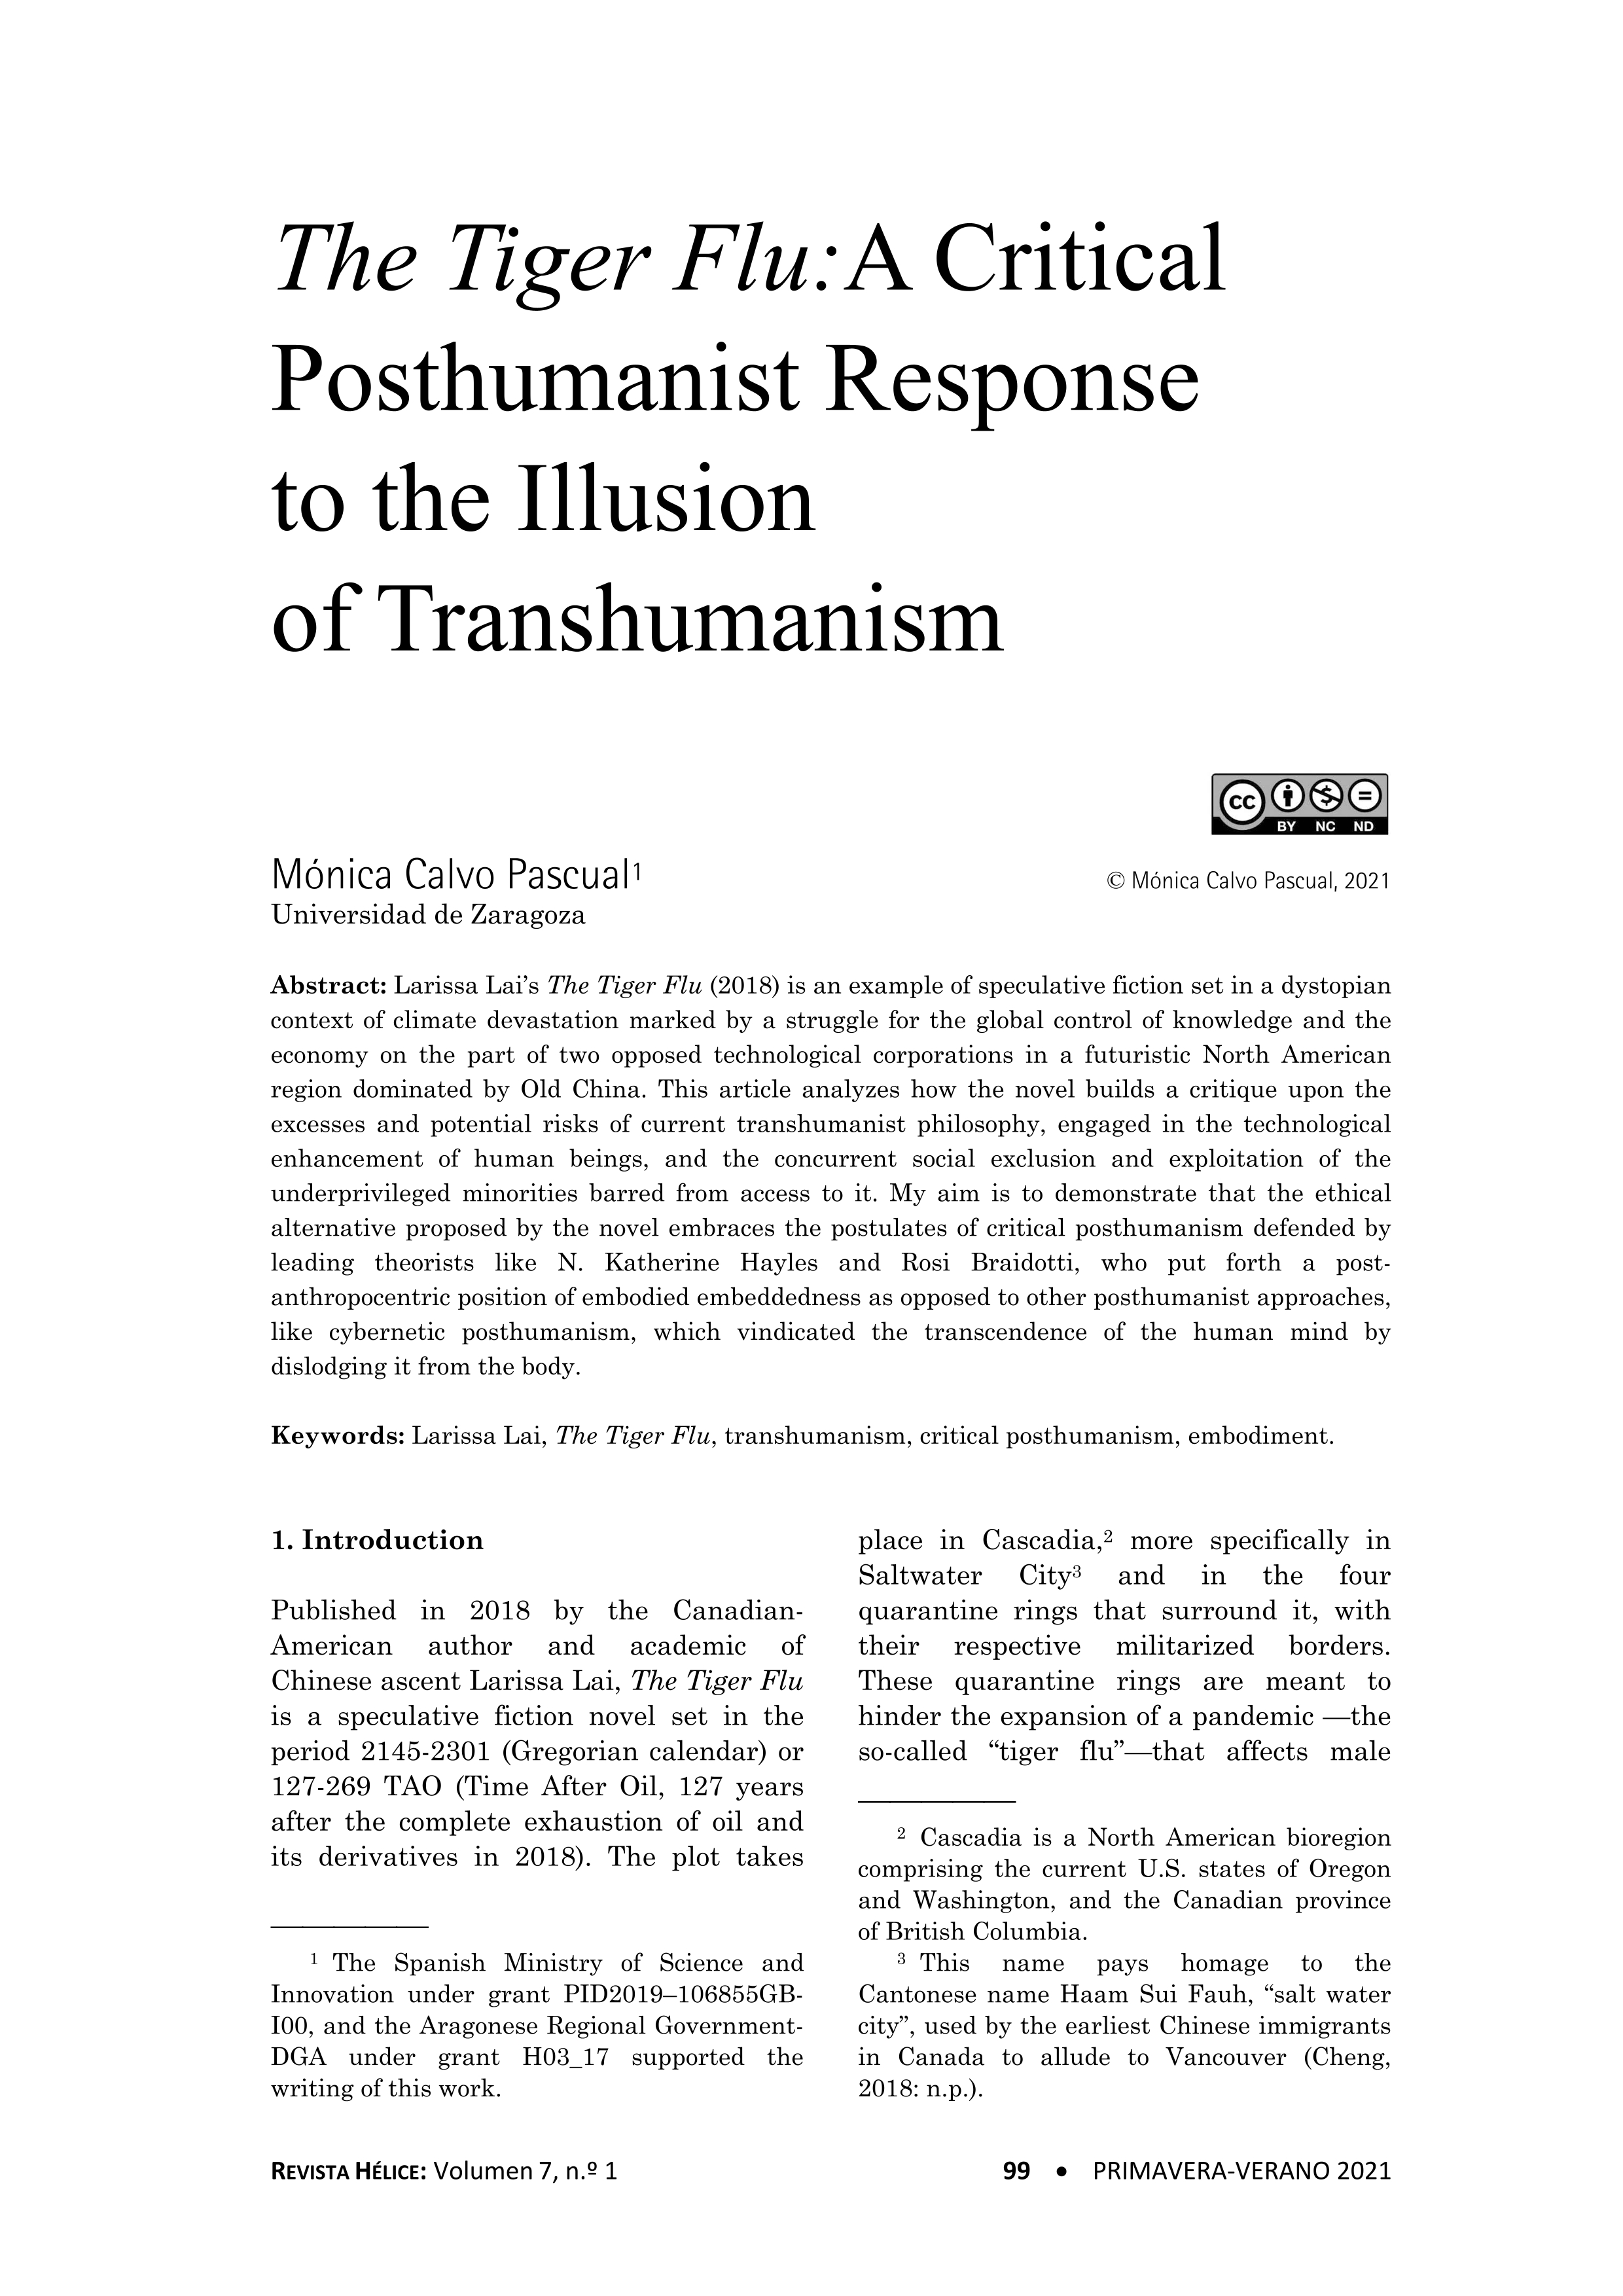 The Tiger Flu: a critical posthumanist response to the Illusion of transhumanism